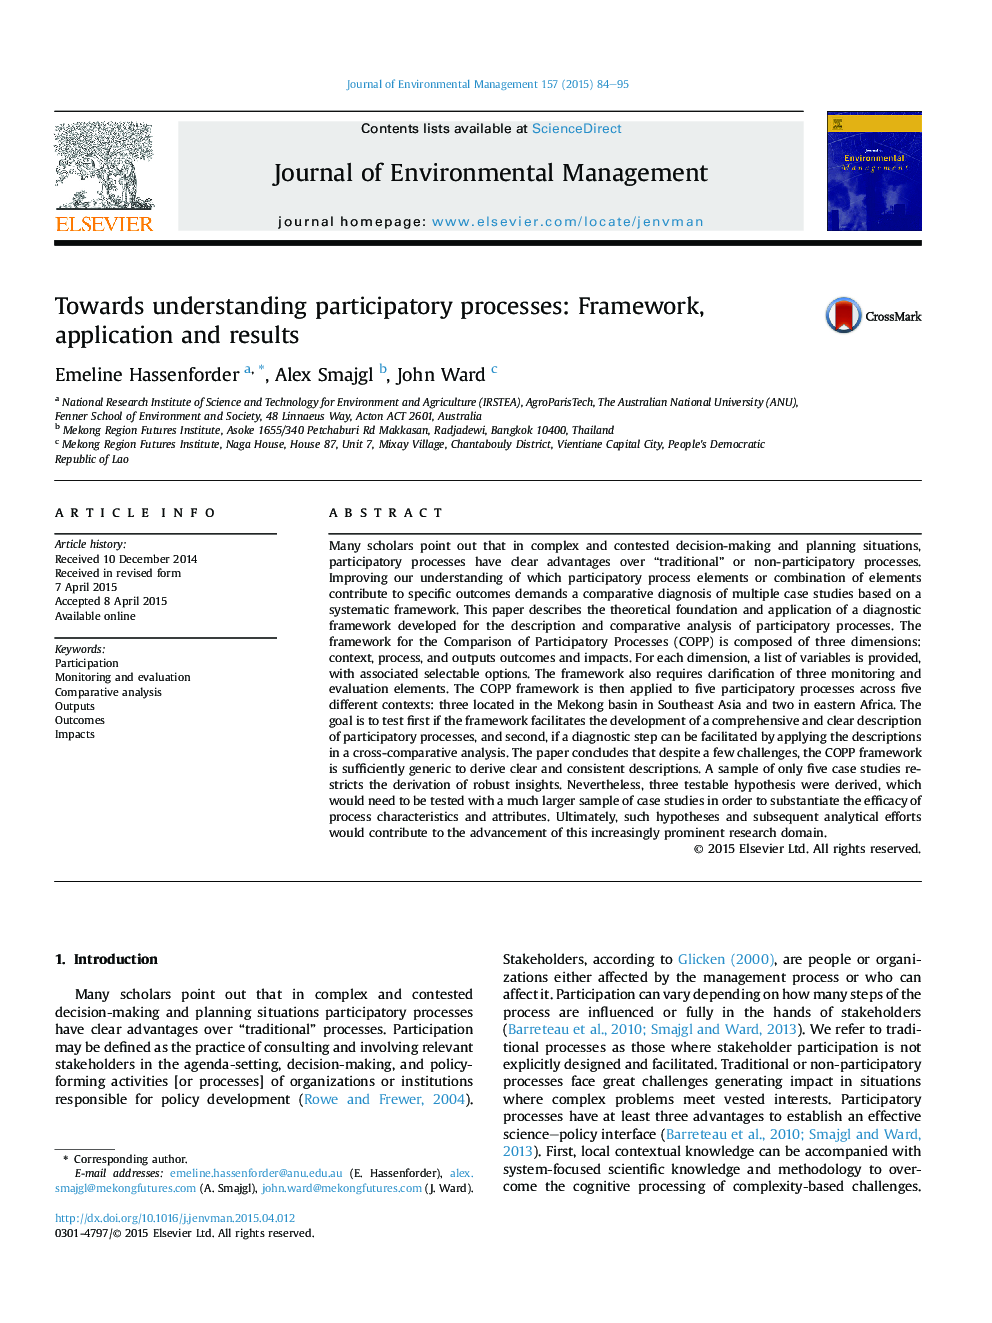 Towards understanding participatory processes: Framework, application and results